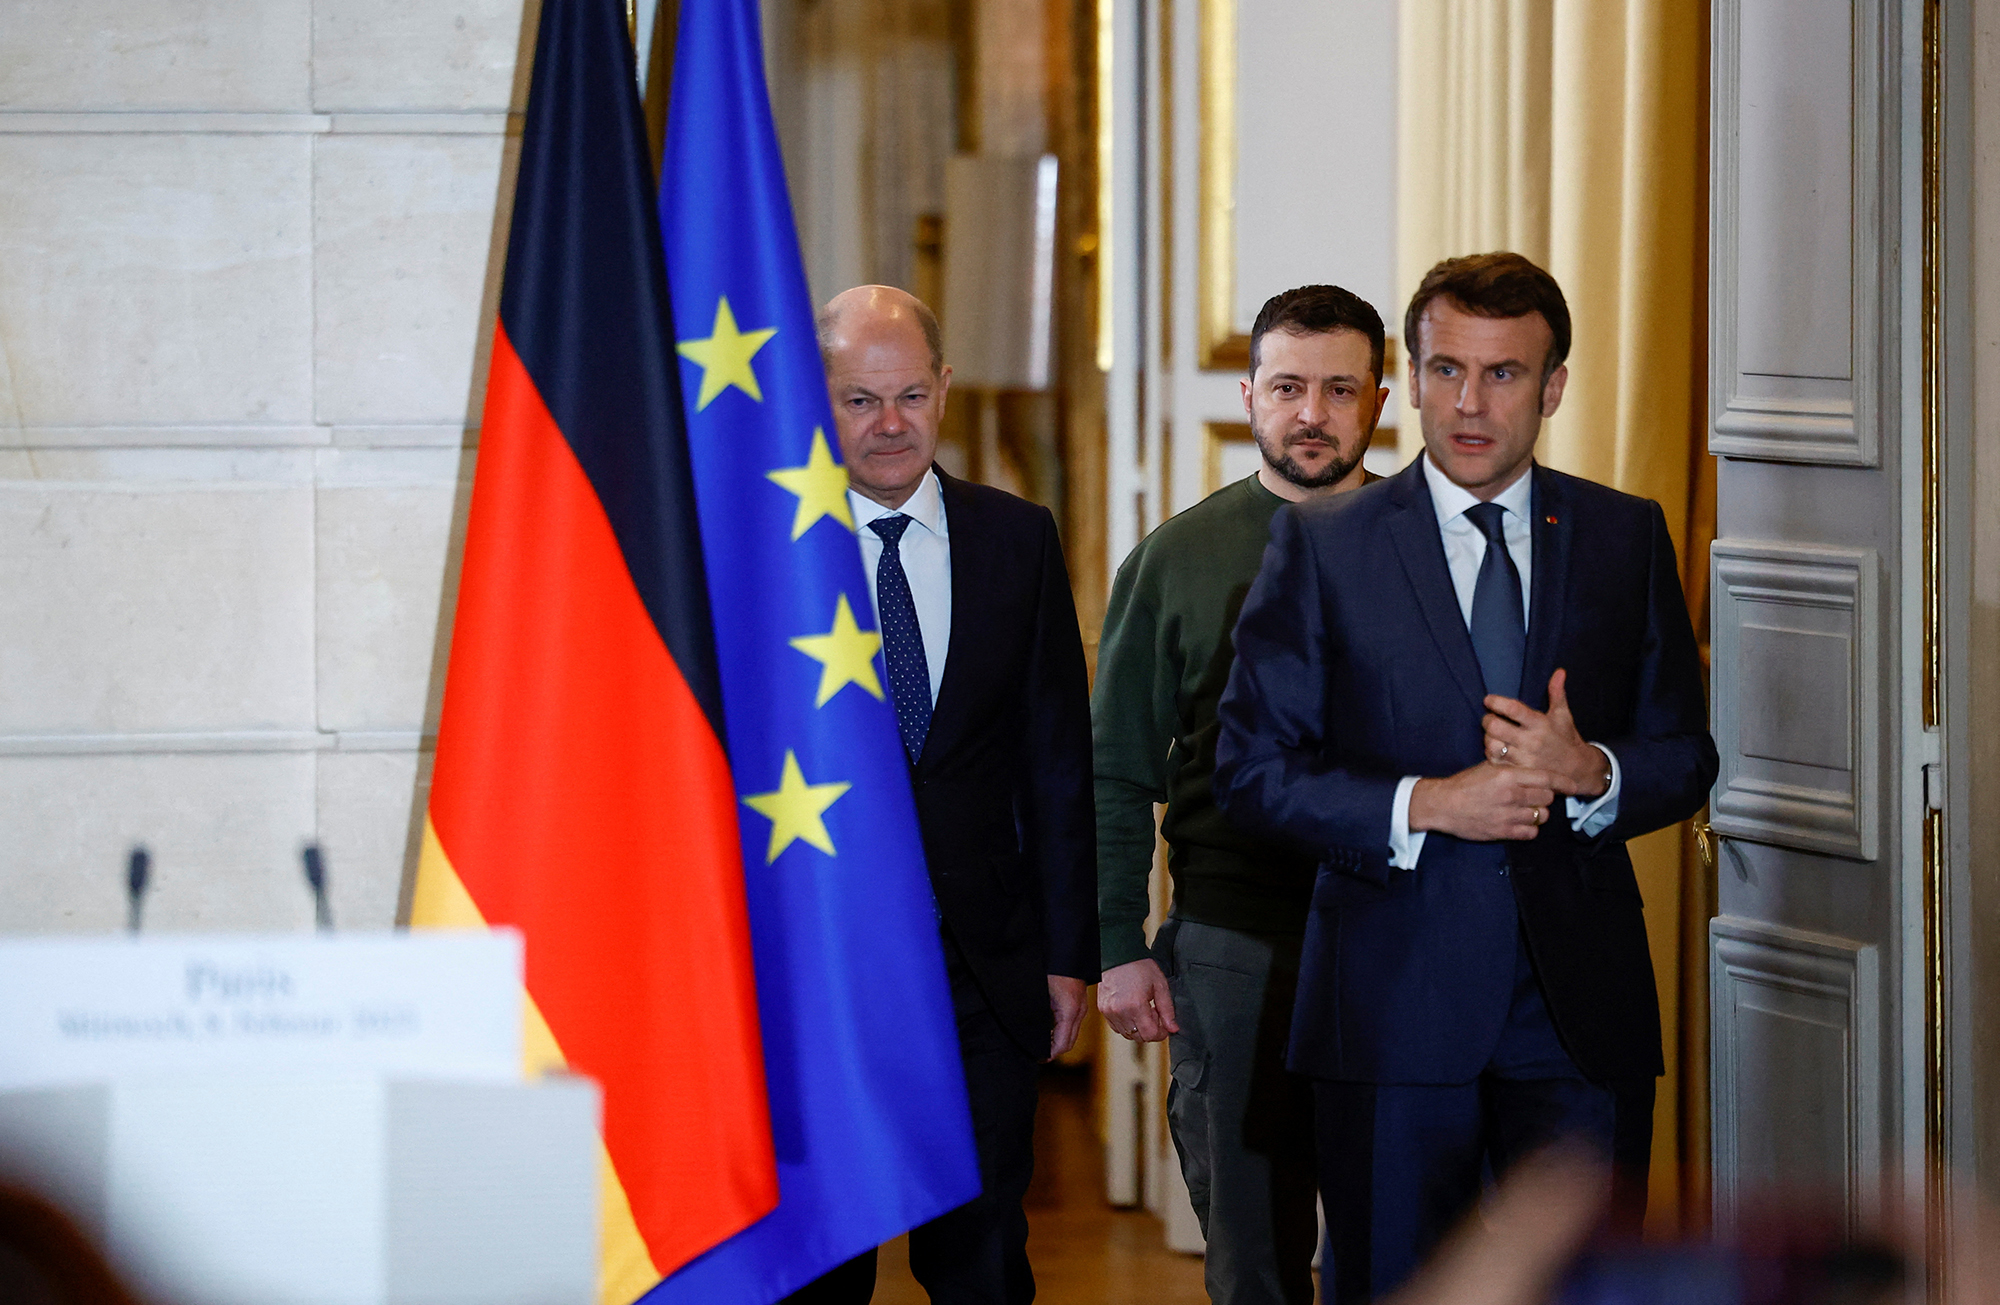 Macron, Zelensky and German Chancellor Olaf Scholz arrive to give a joint statement at the Elysee Palace on February 8.